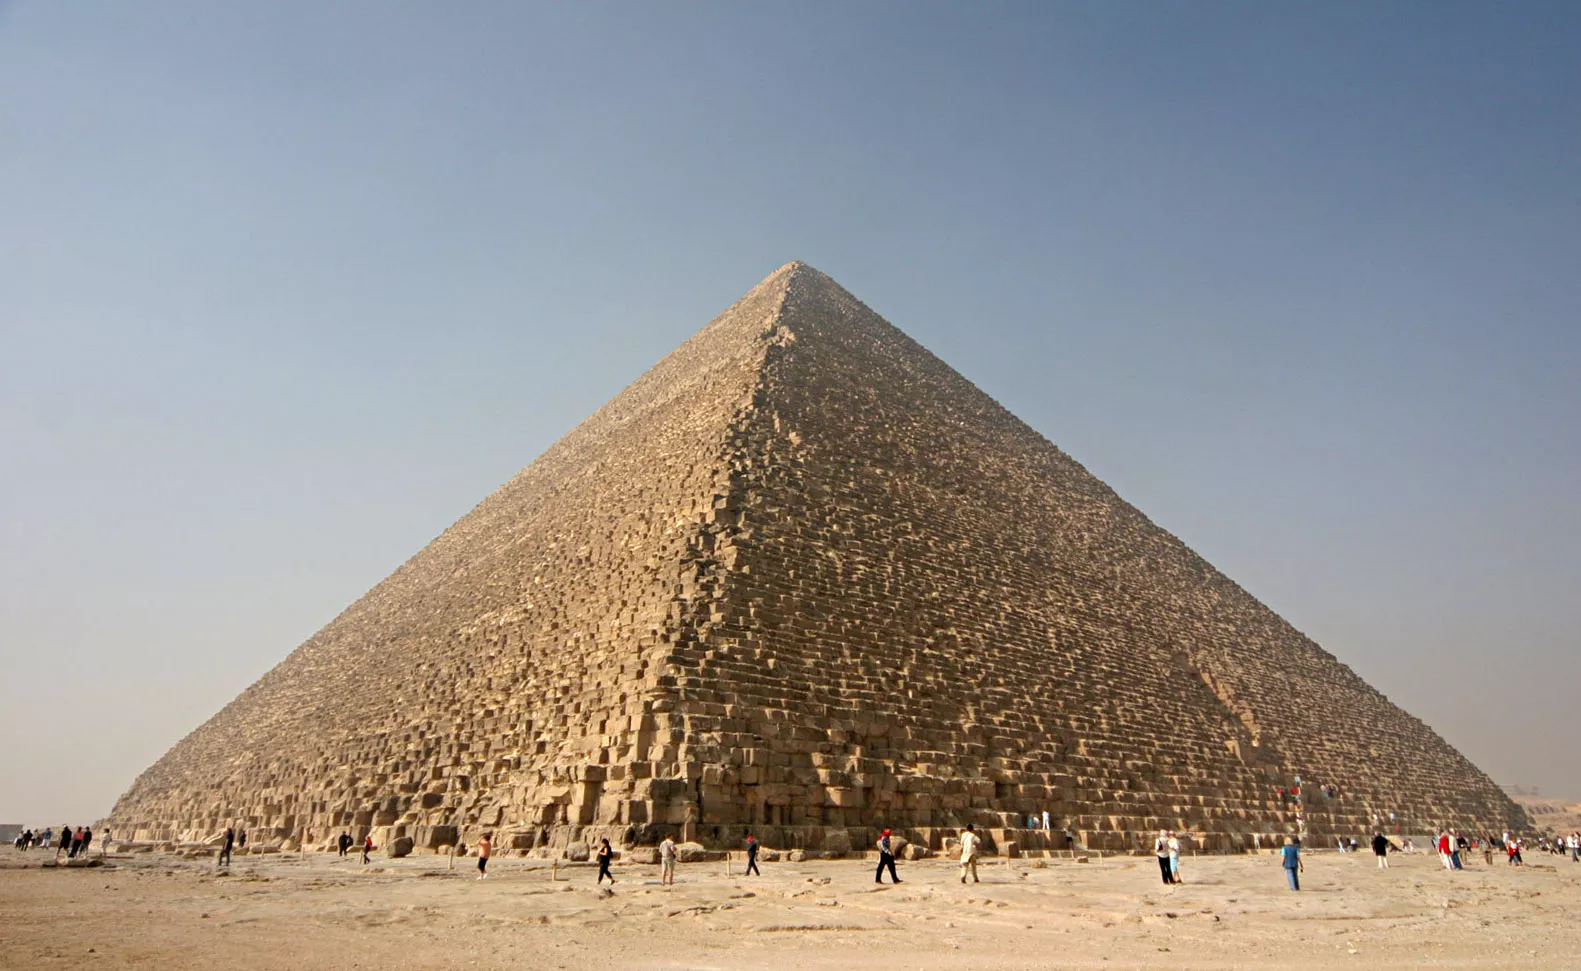 Pyramids of Giza in Egypt, Africa | Excavations - Rated 5